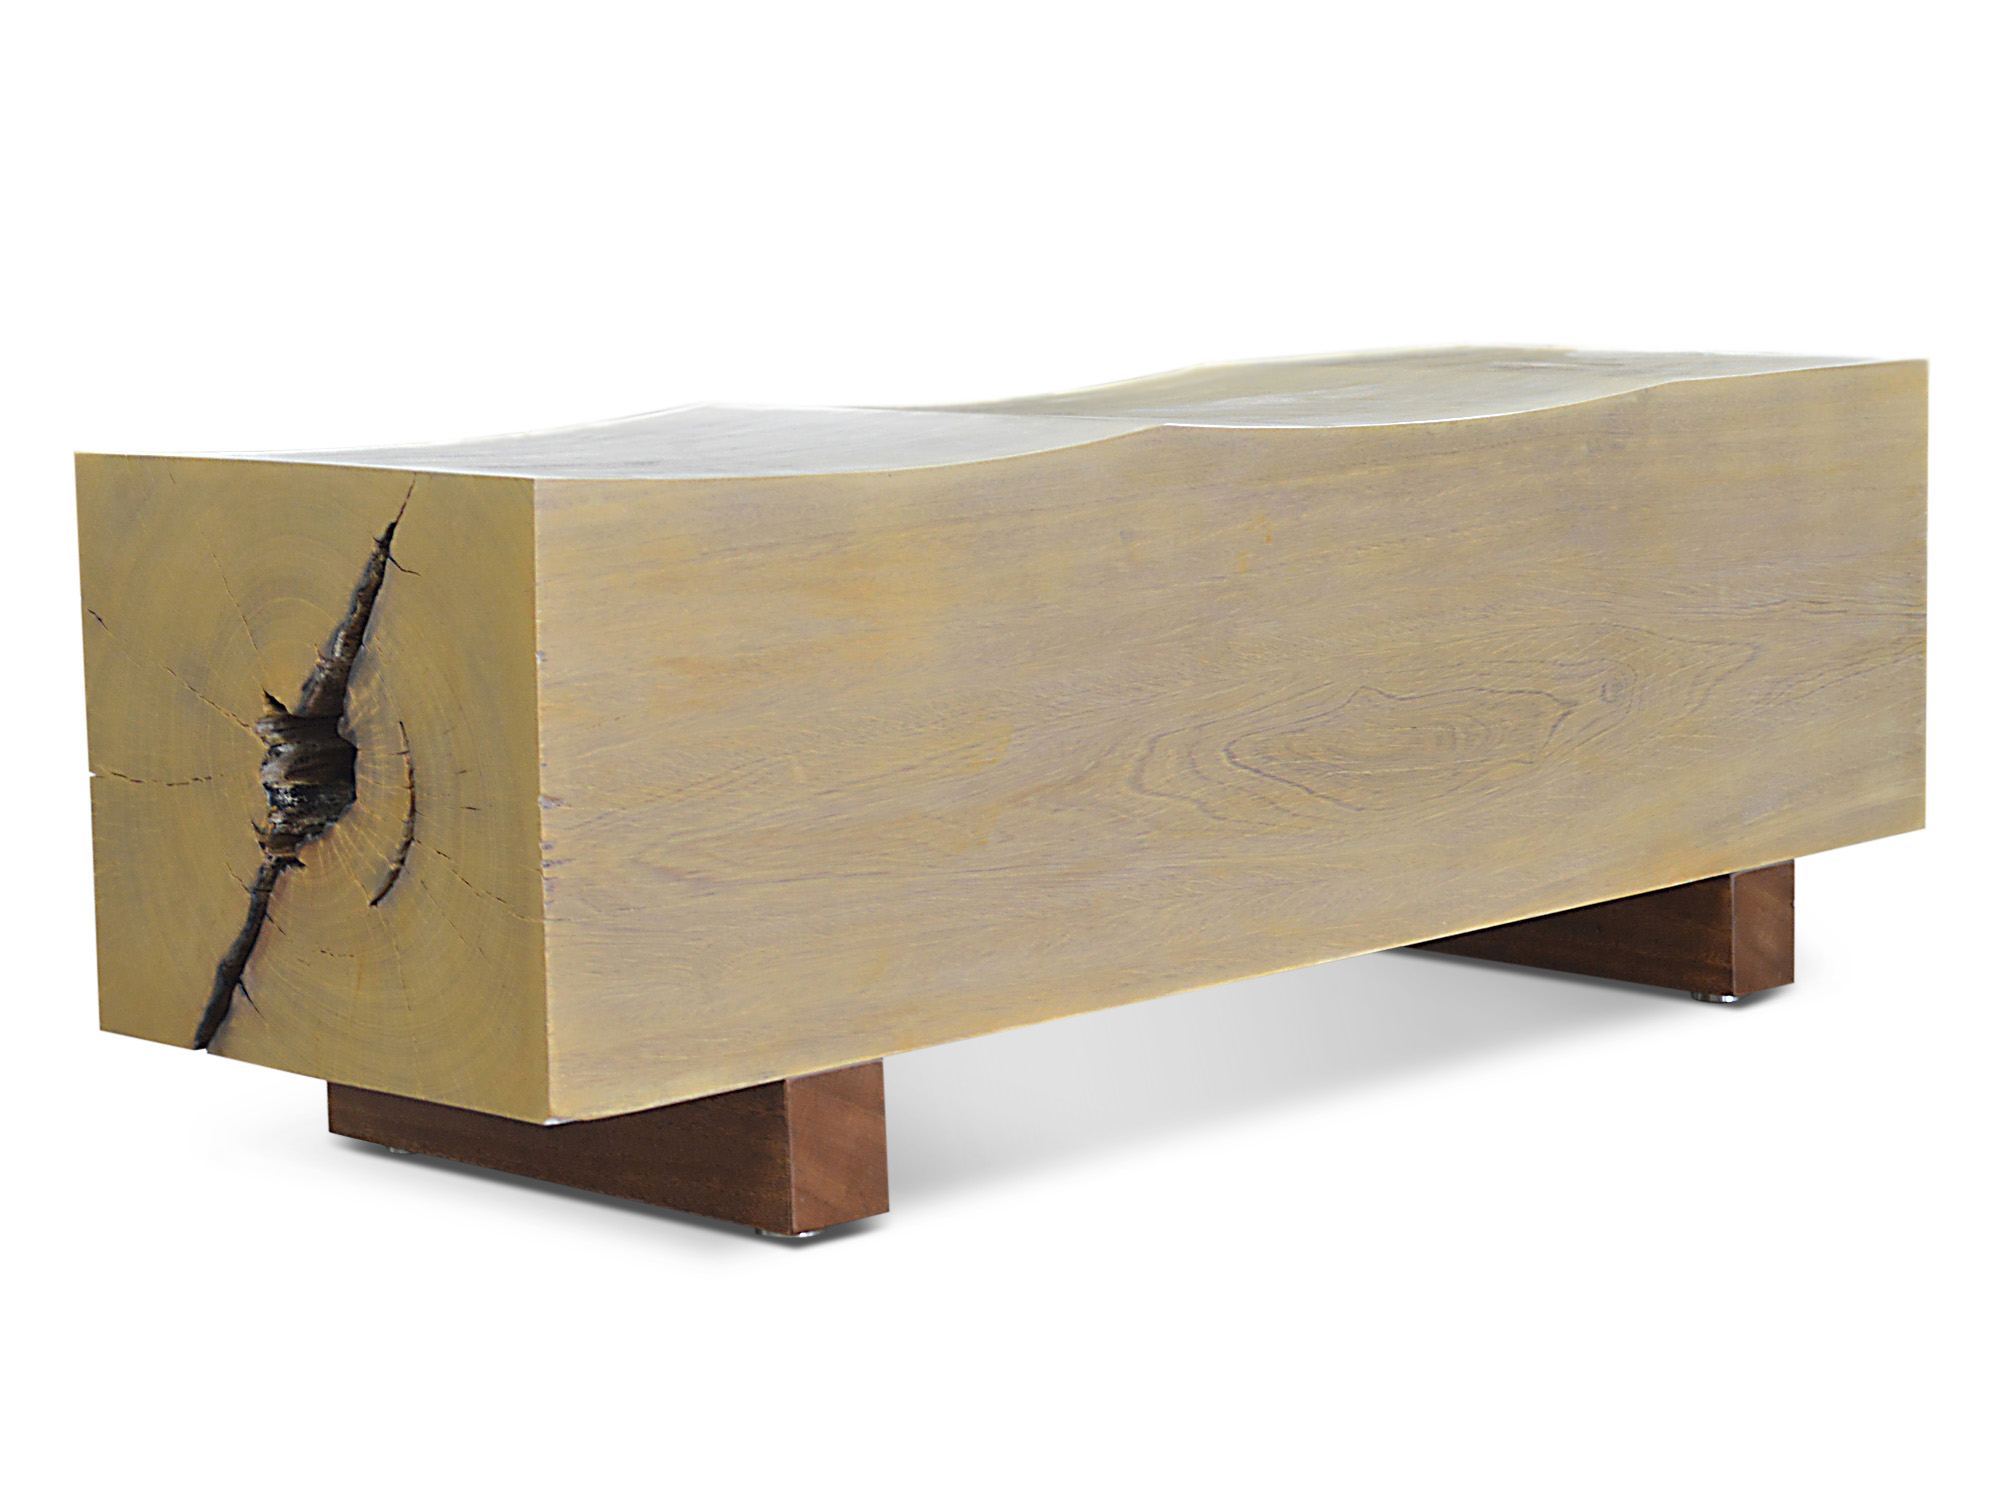 BER-018 Pedra Bench with Showhole 05